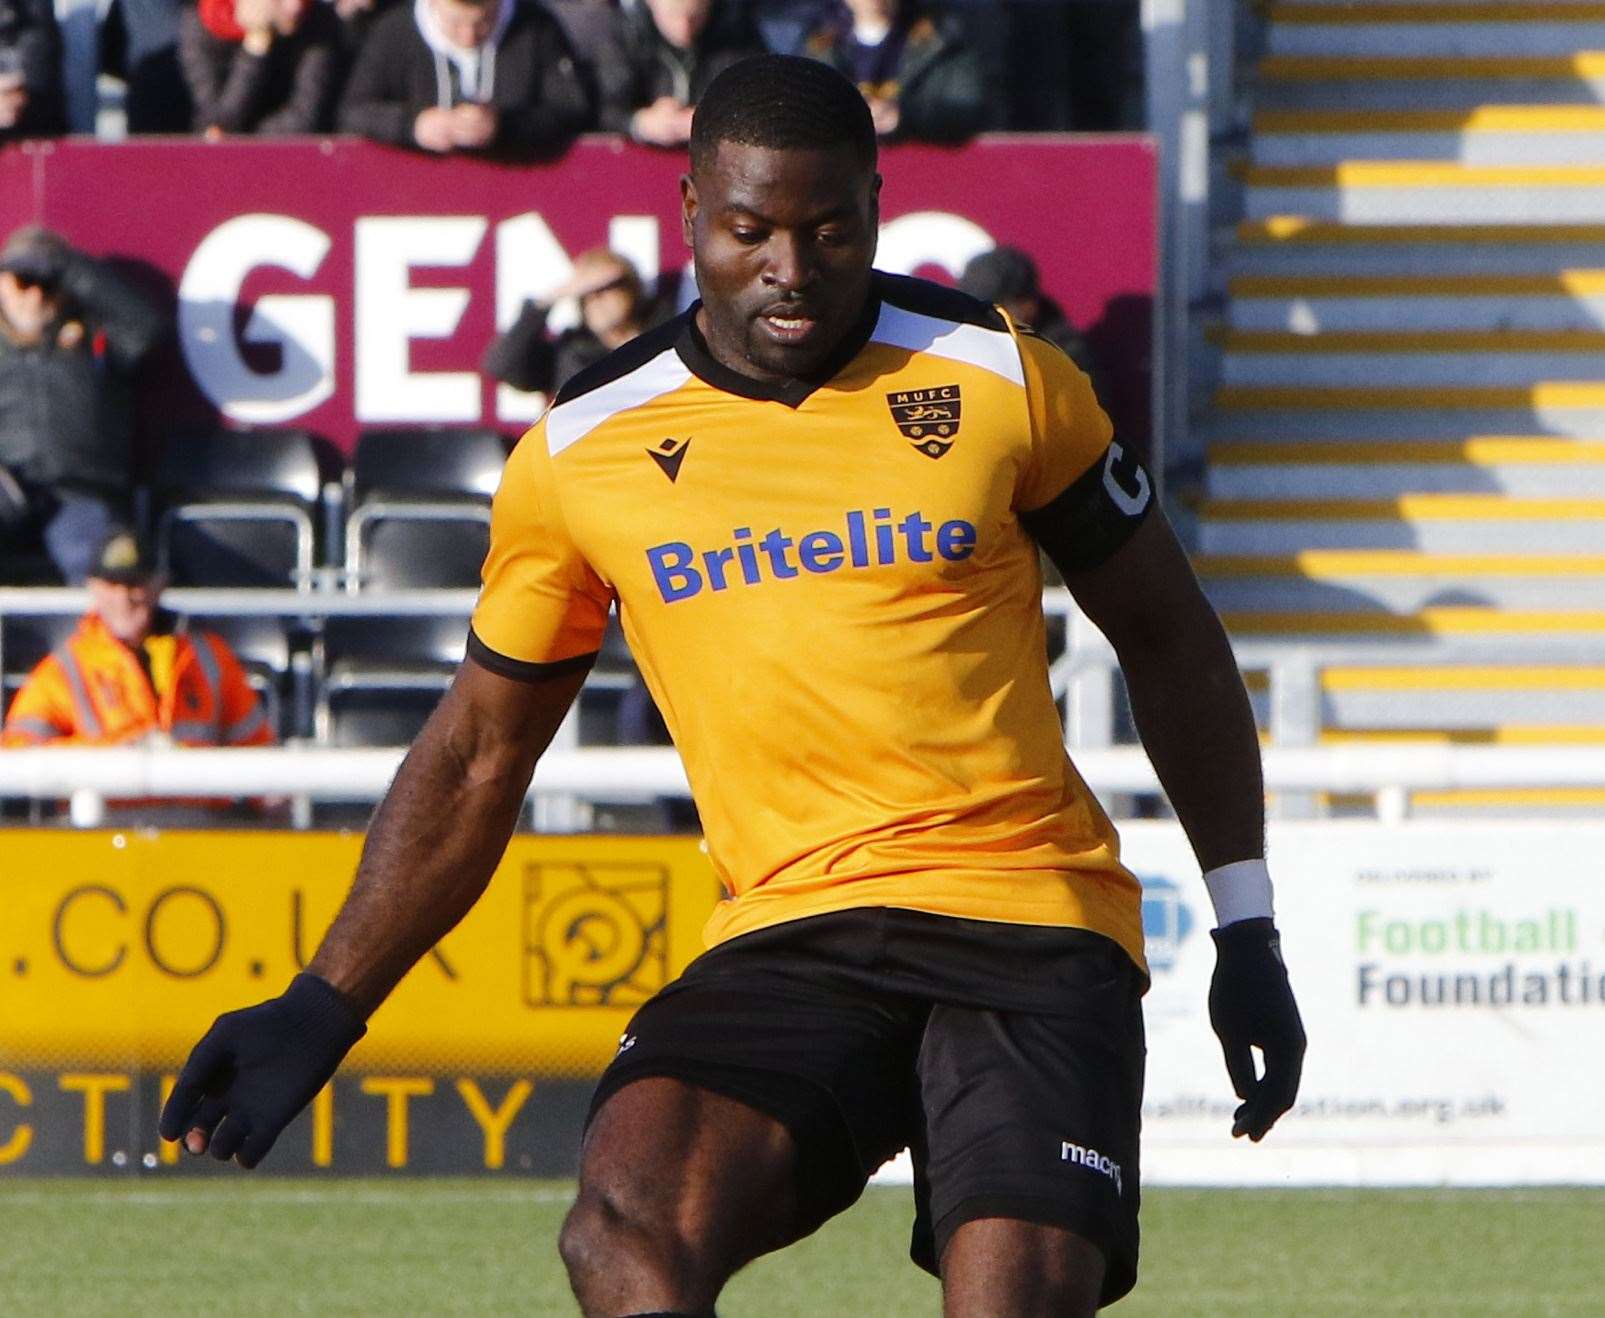 Maidstone United captain George Elokobi was first up in the penalty shoot-out Picture: Andy Jones